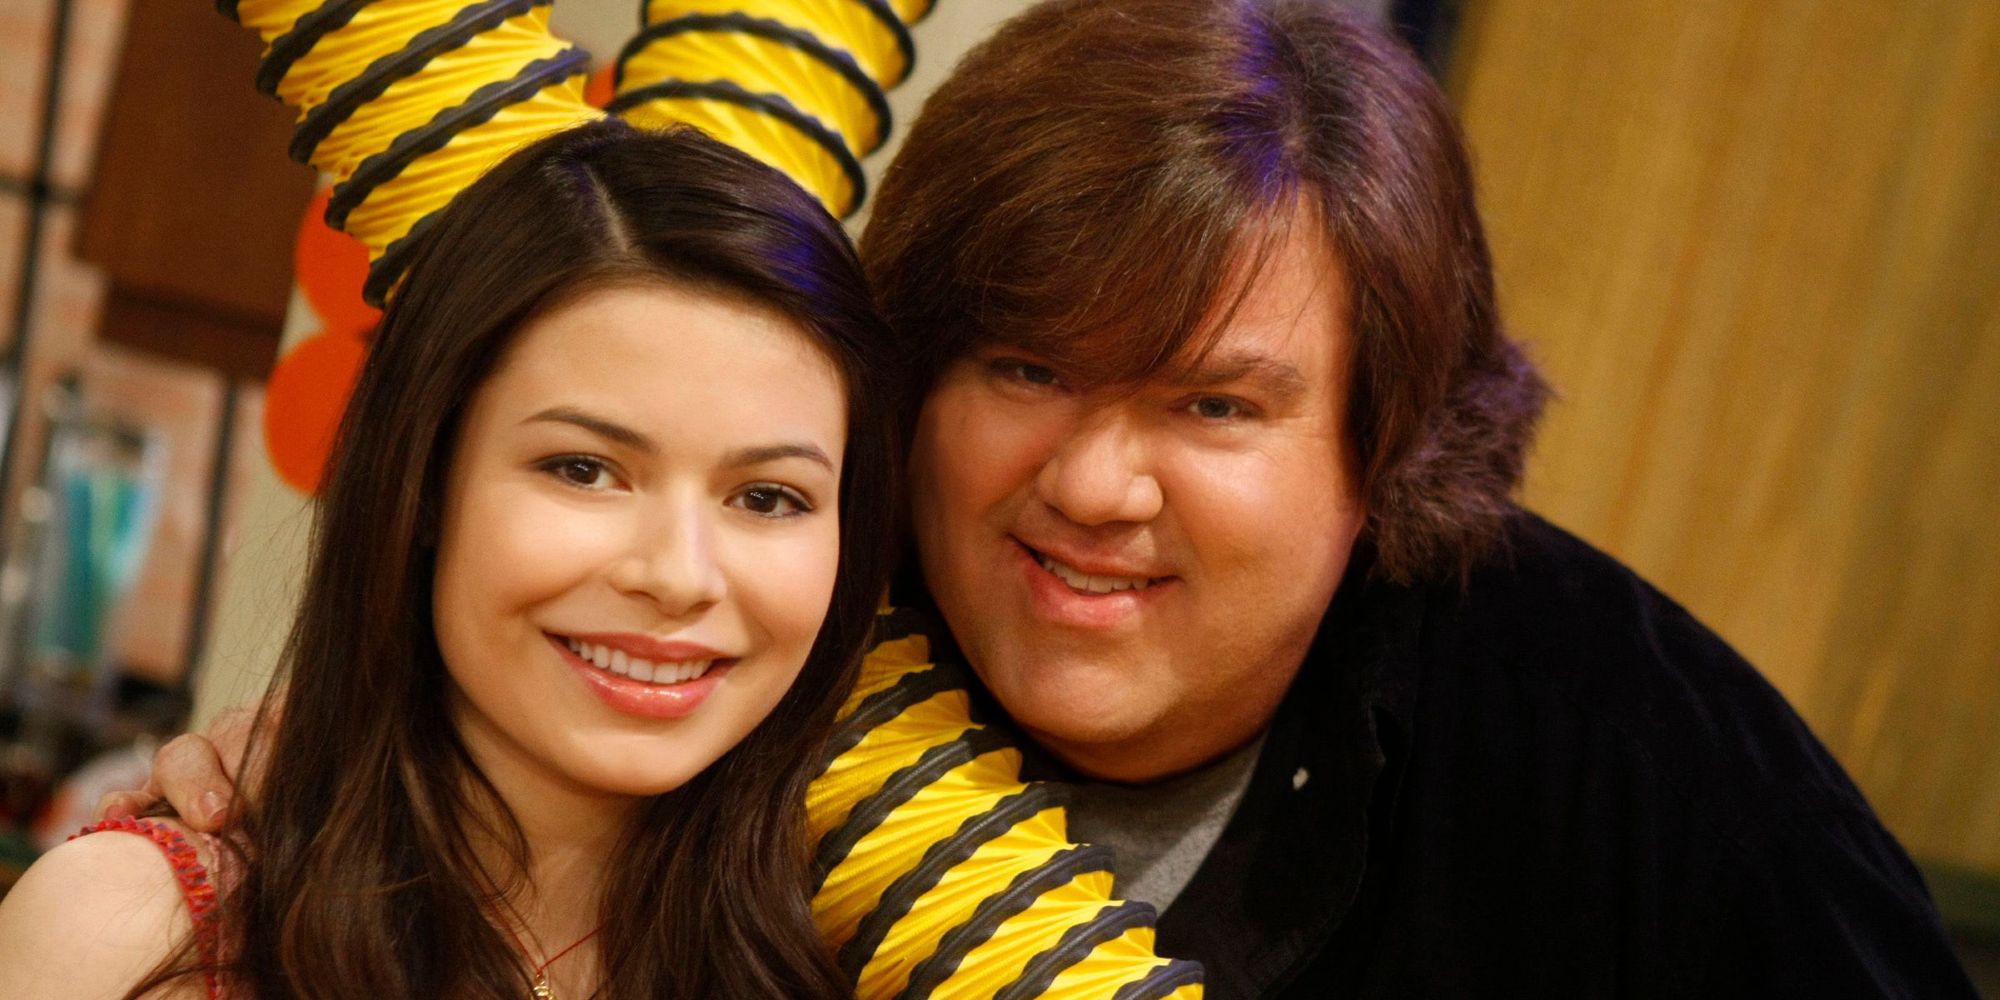 Miranda Cosgrove and Dan Schneider smiling on the set of iCarly